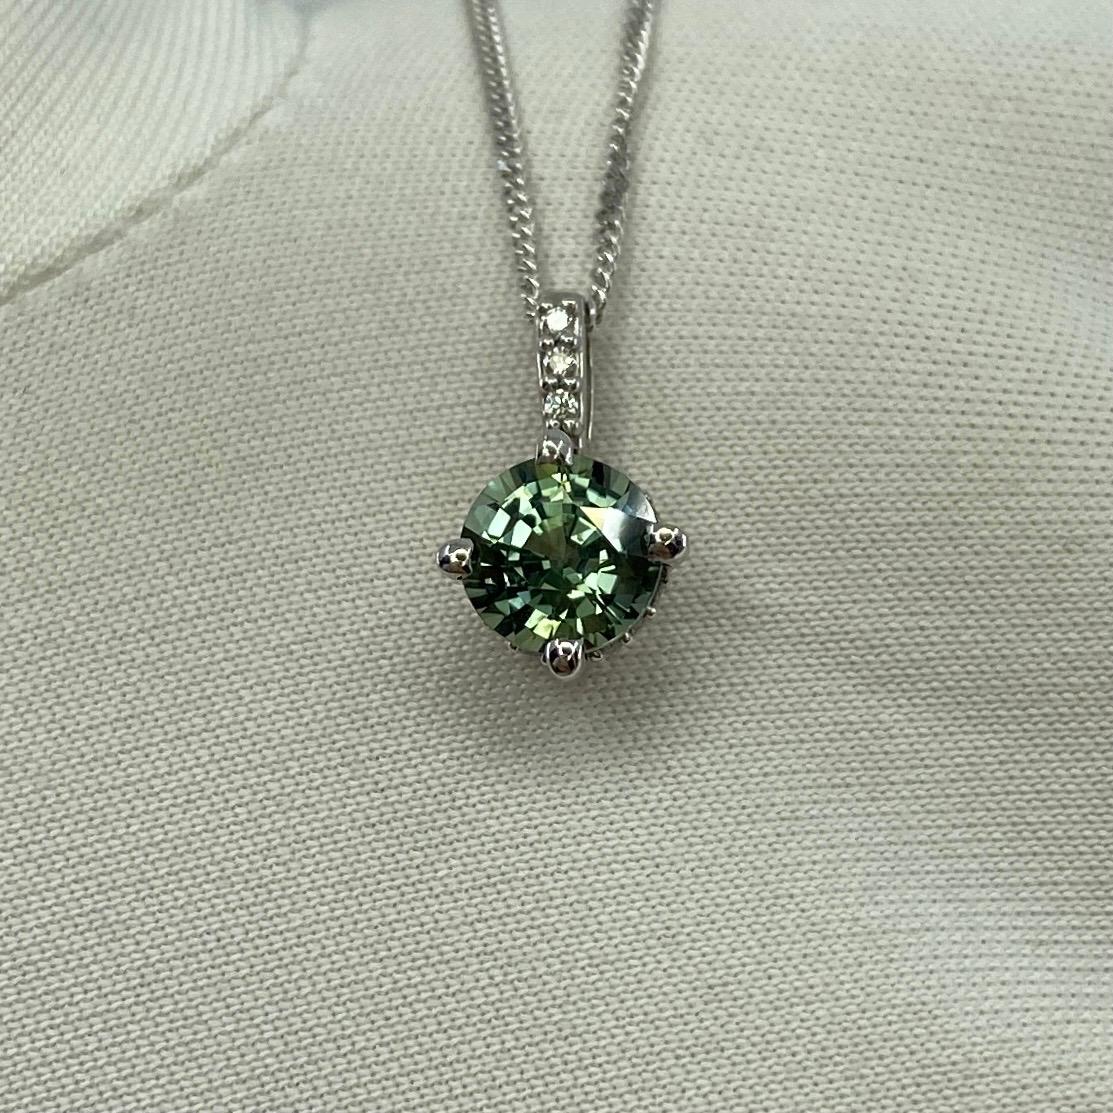 IGI Certified Untreated Green-Blue Sapphire & Diamond Surround Set 18k White Gold Diamond Pendant.

1.12 Carat sapphire with fine vivid green blue colour and excellent clarity, practically flawless. Also has an excellent round cut which displays the